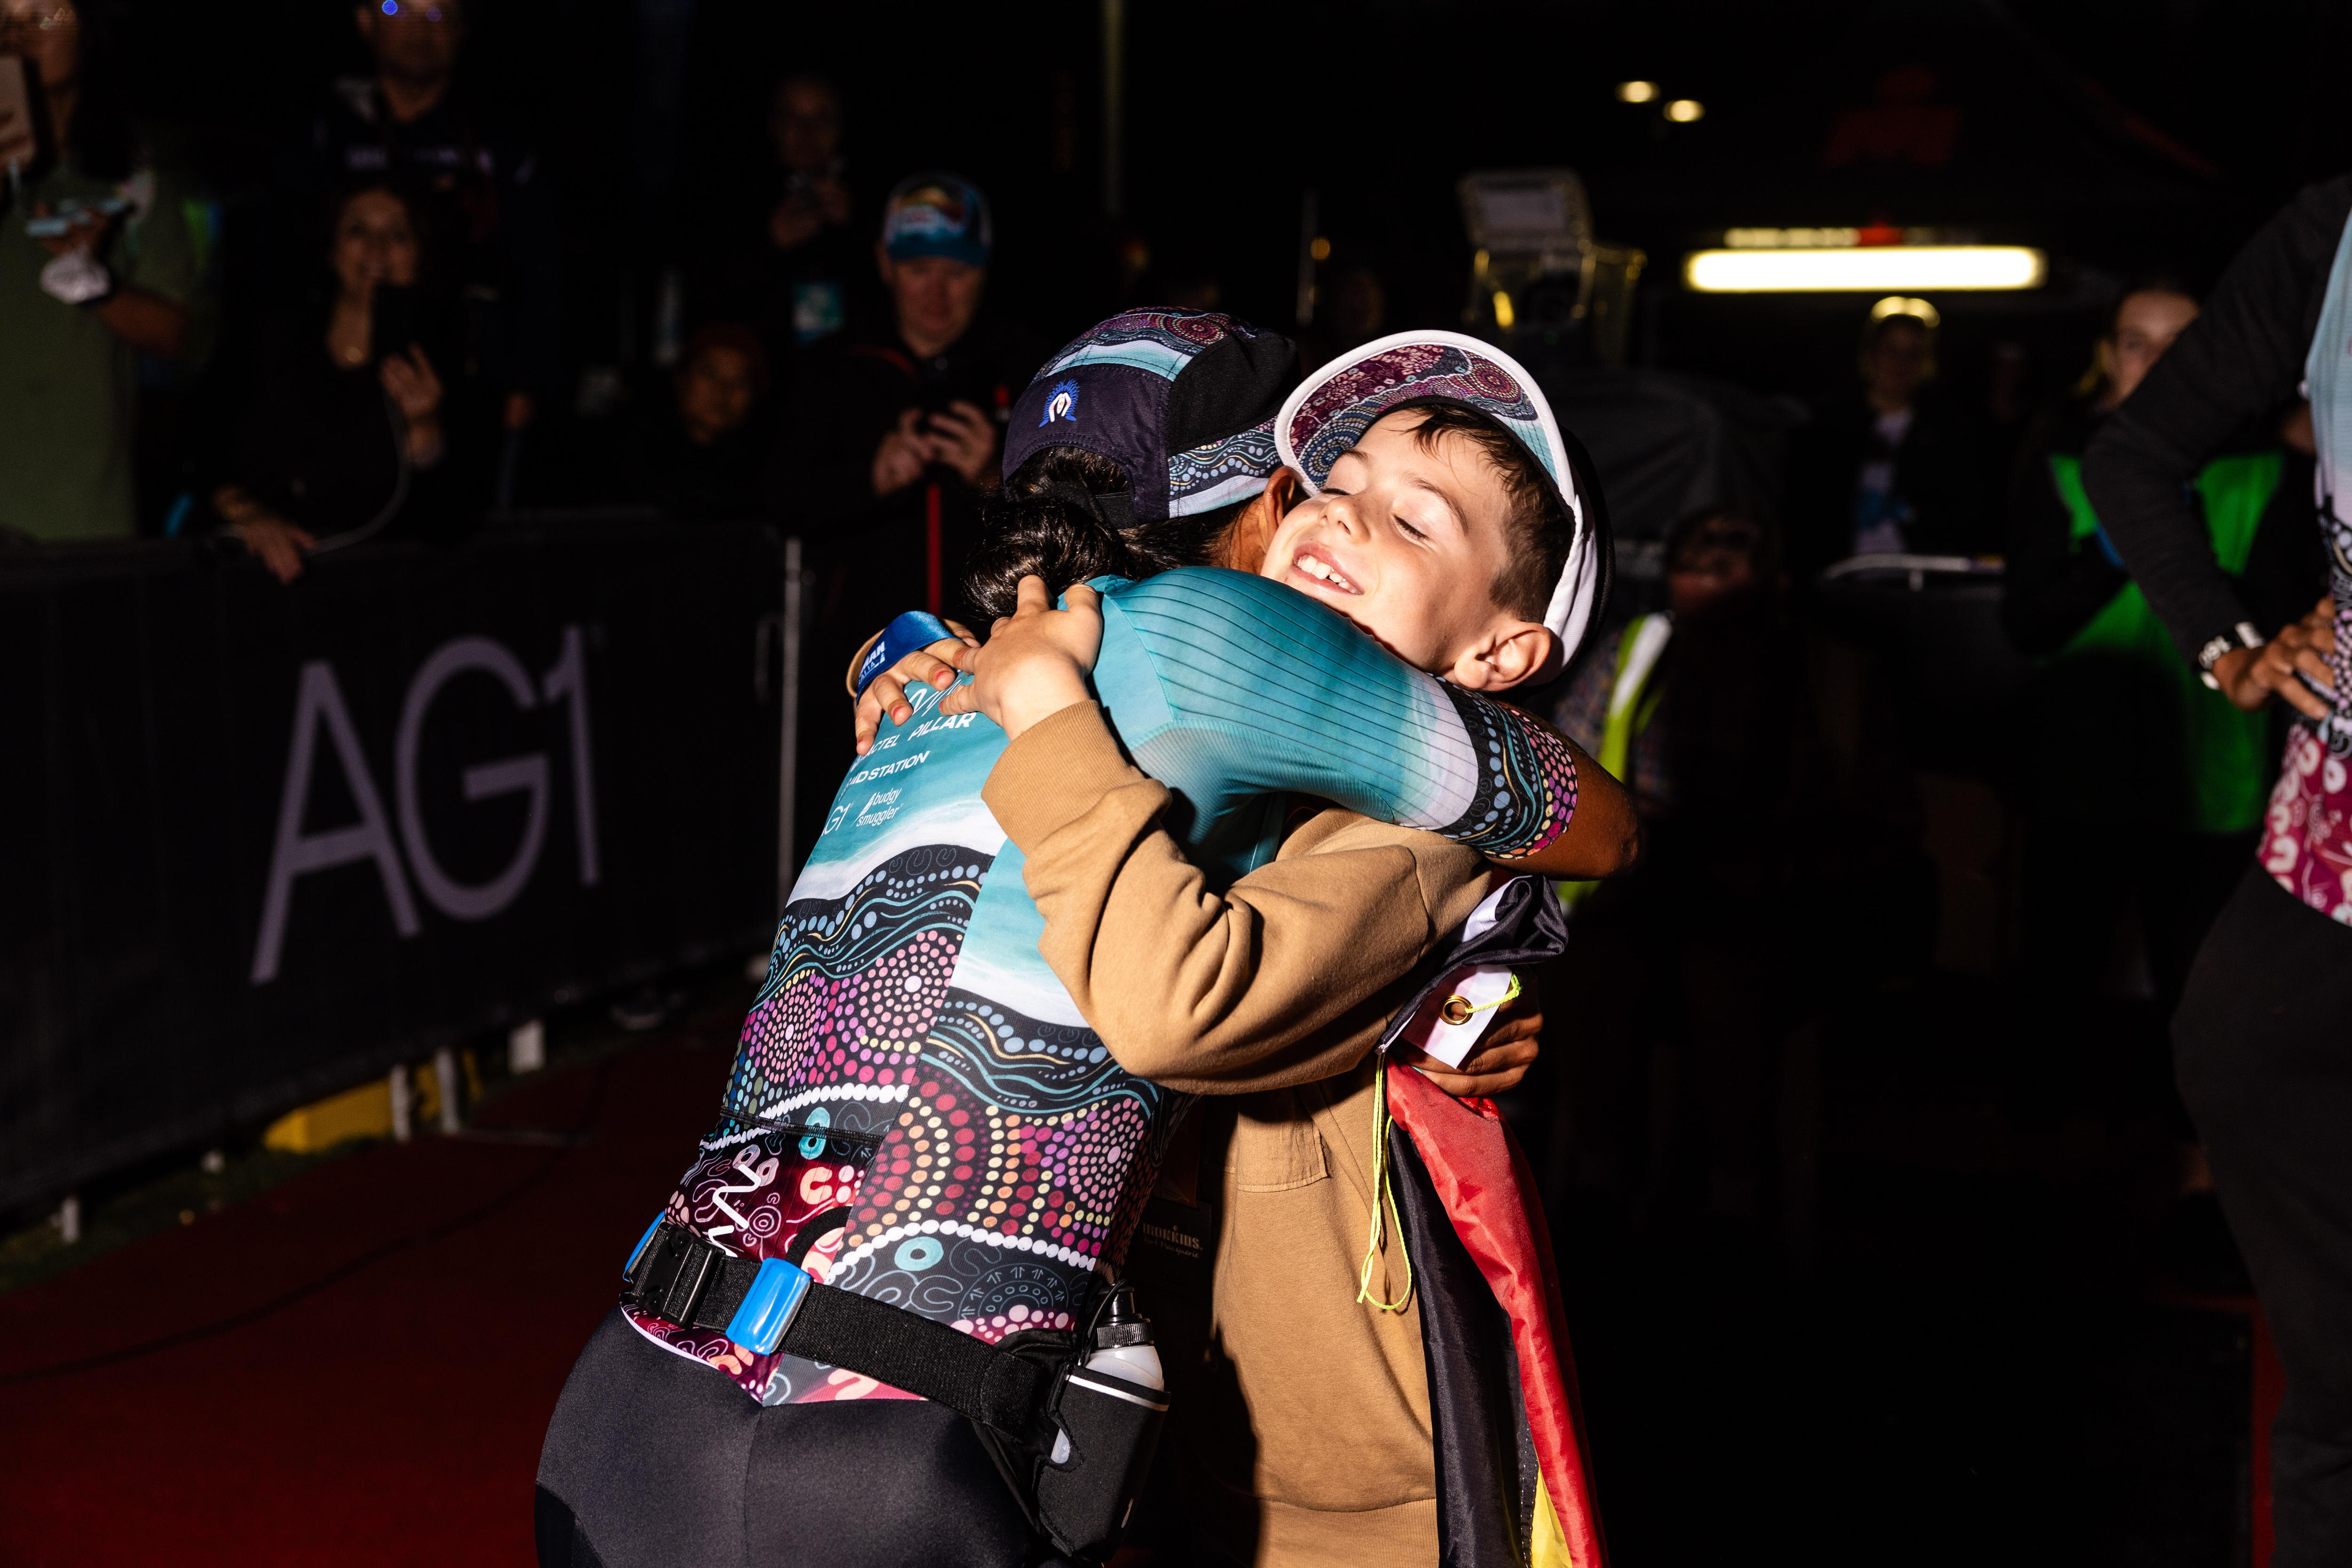 Indigenous female athlete hugs a young boy at the finish line of a triathlon race.